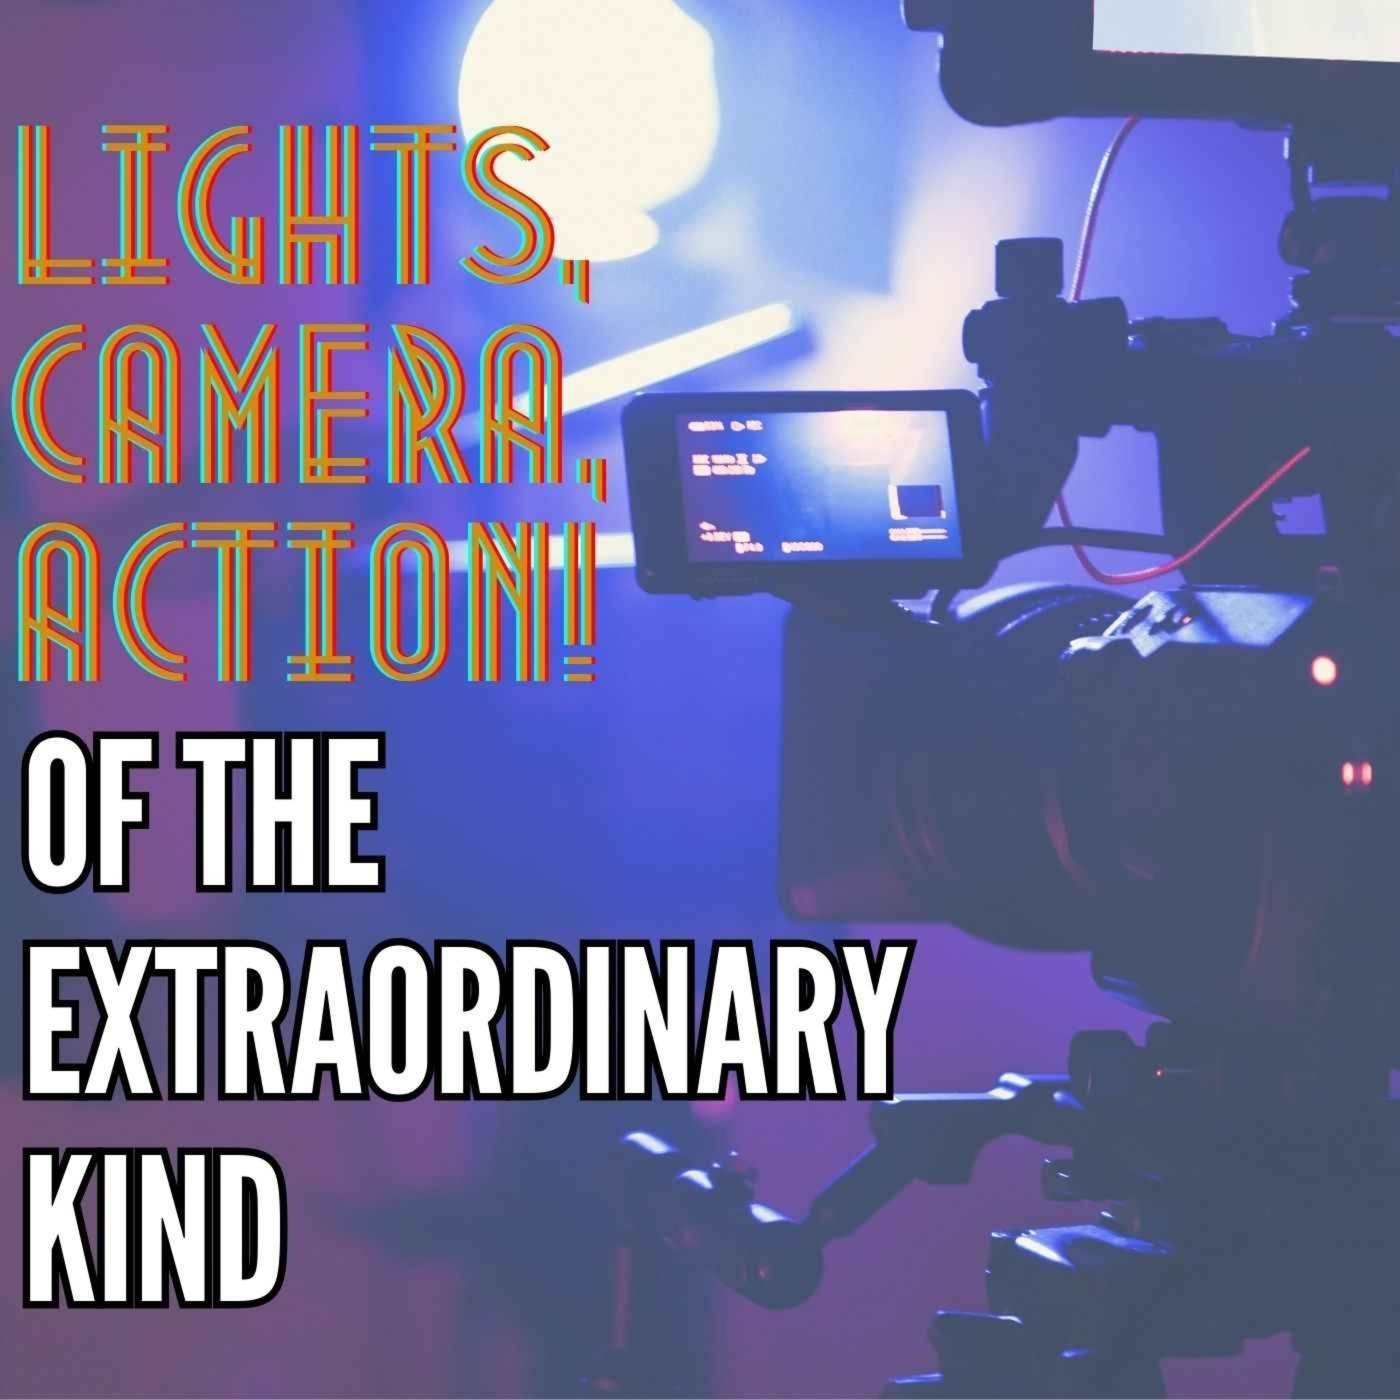 Ep. #579: LIGHTS, CAMERA, ACTION! OF THE EXTRAORDINARY KIND w/ Tyler Transue